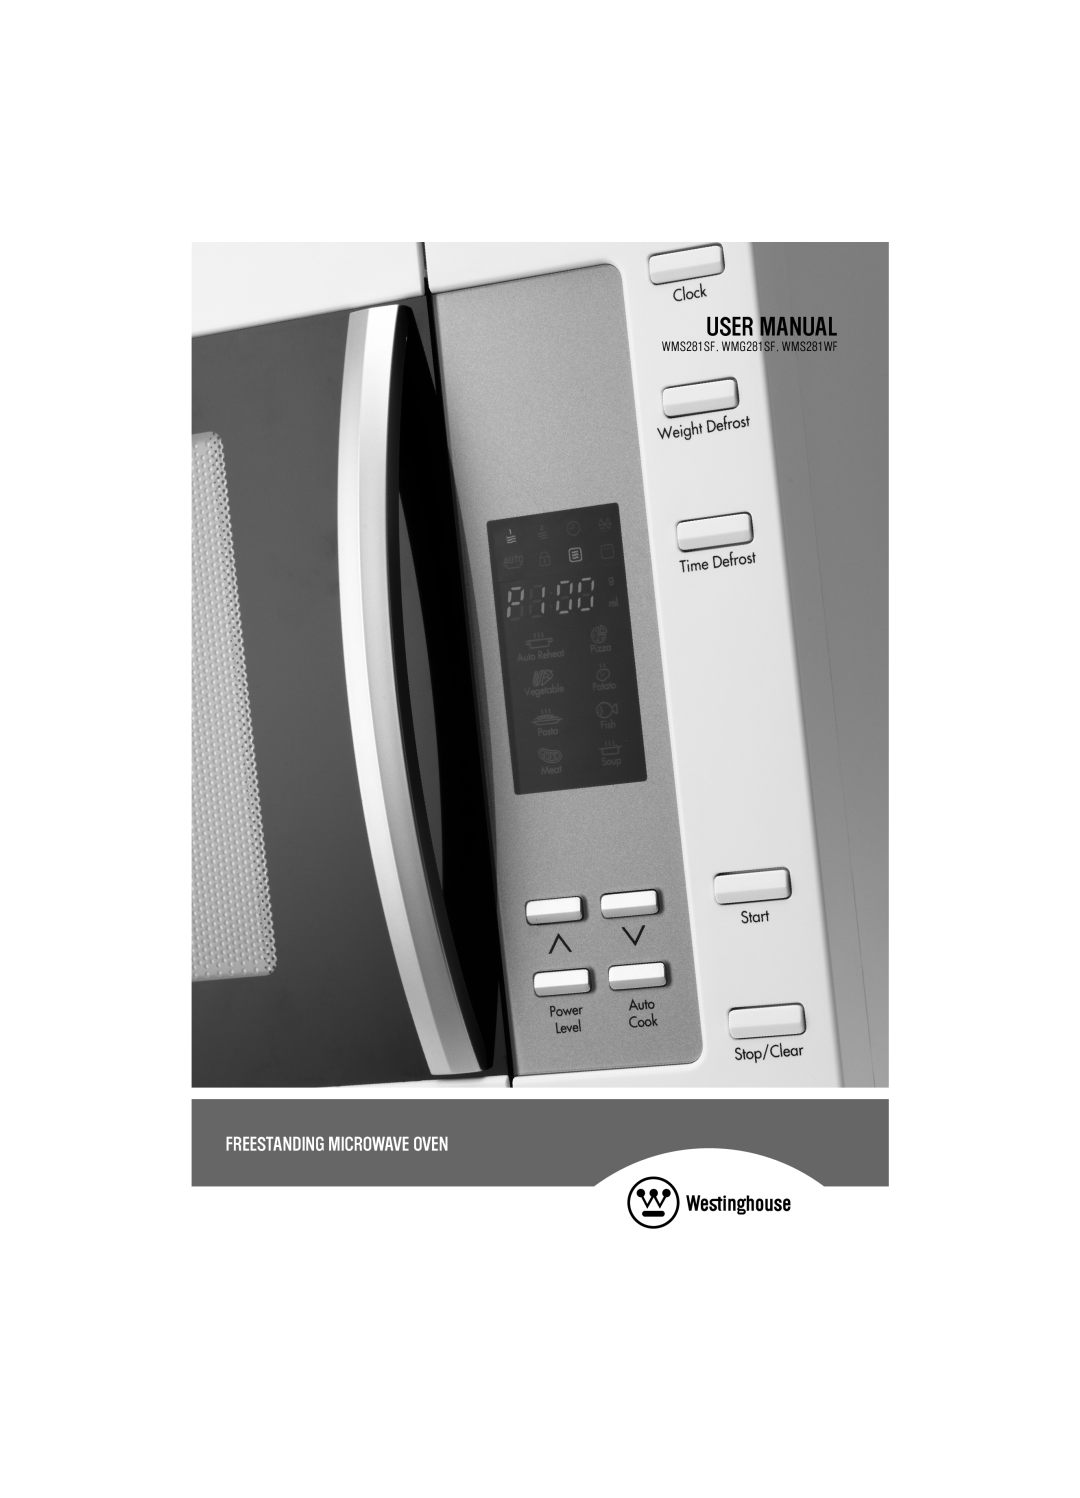 Westinghouse user manual Freestanding Microwave Oven, WMS281SF, WMG281SF, WMS281WF 